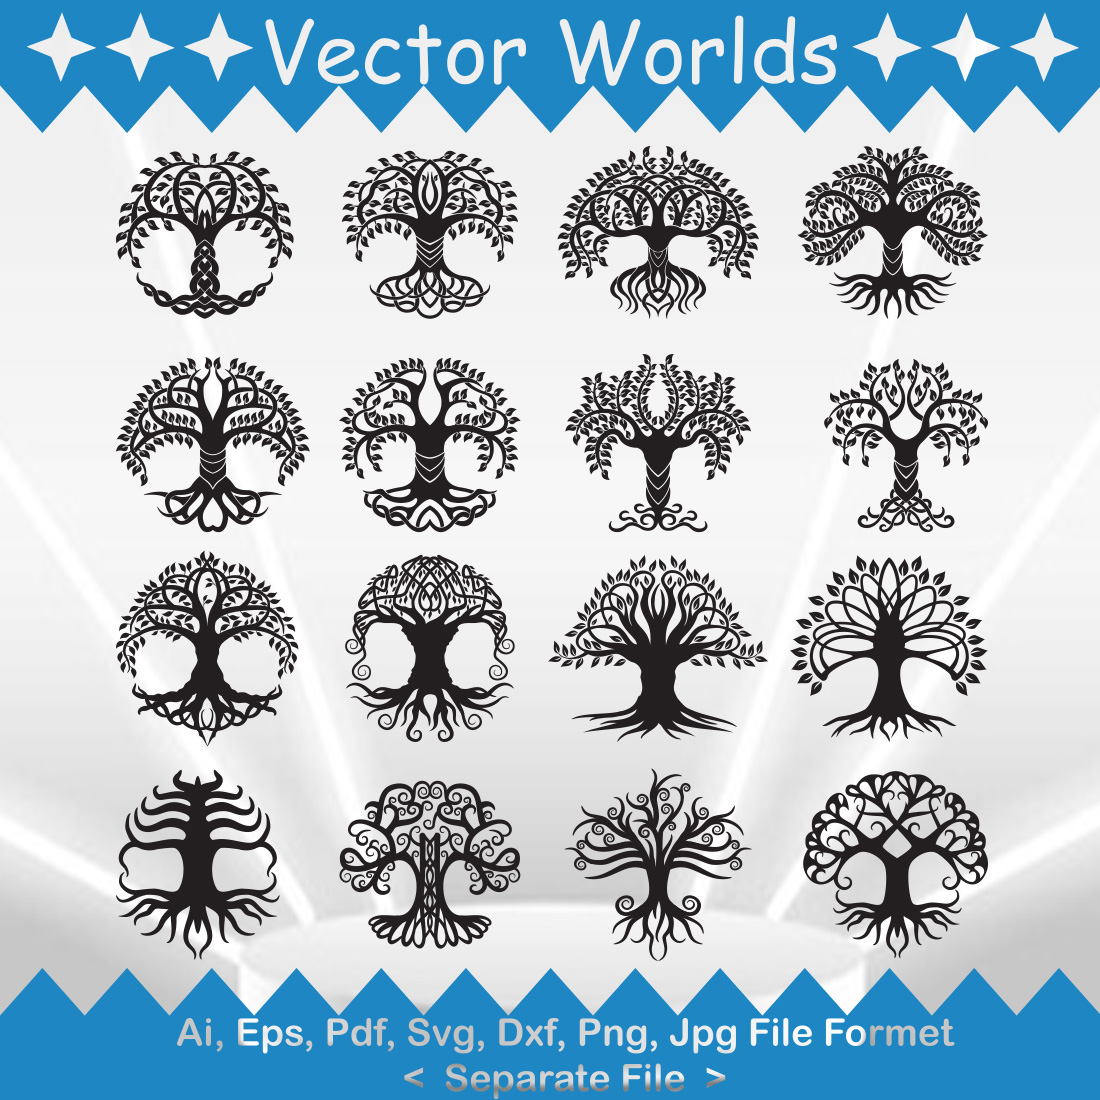 The Tree of Life Symbol SVG Vector Design cover image.